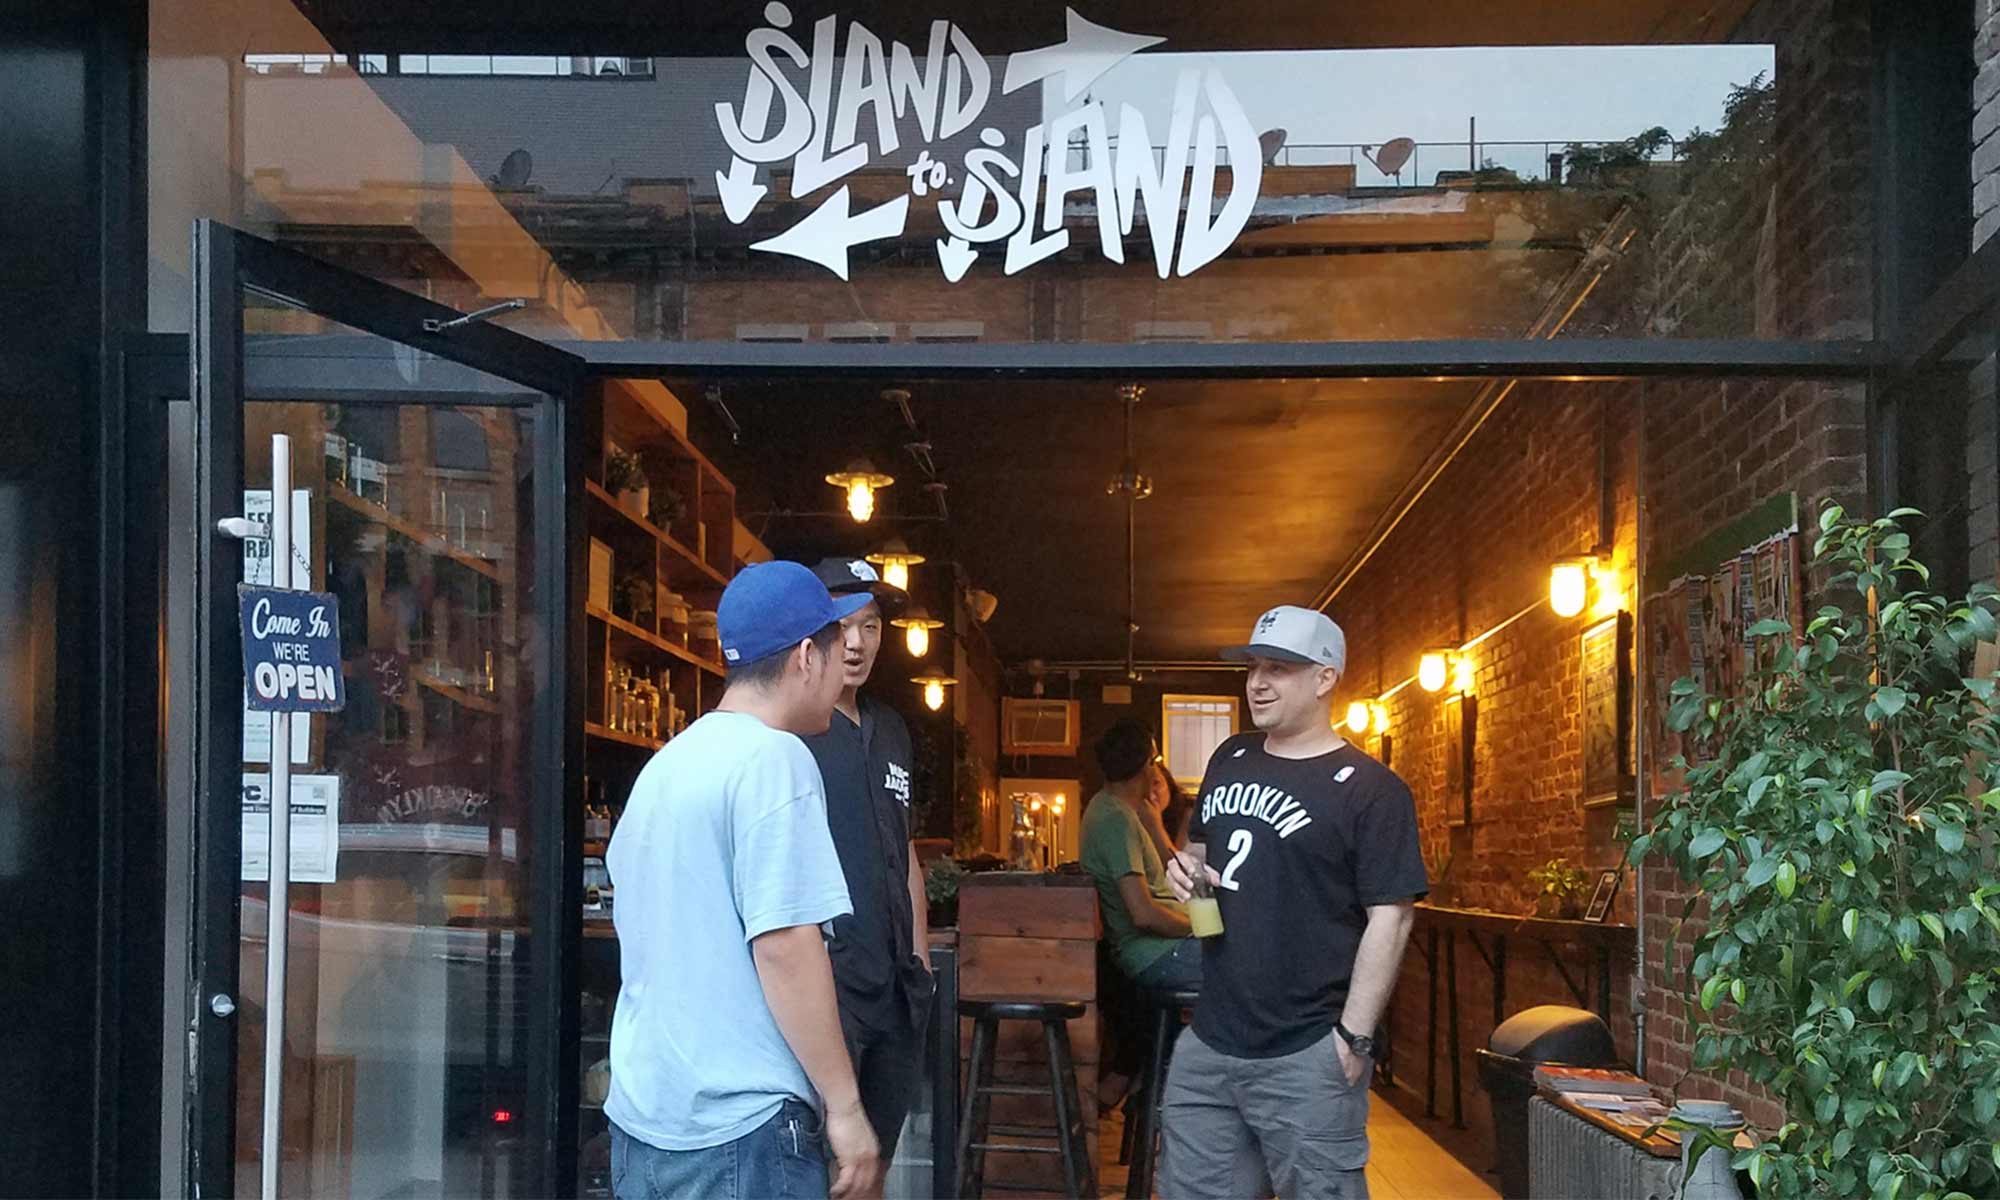 Island to Island Brewery and Juicery Taproom